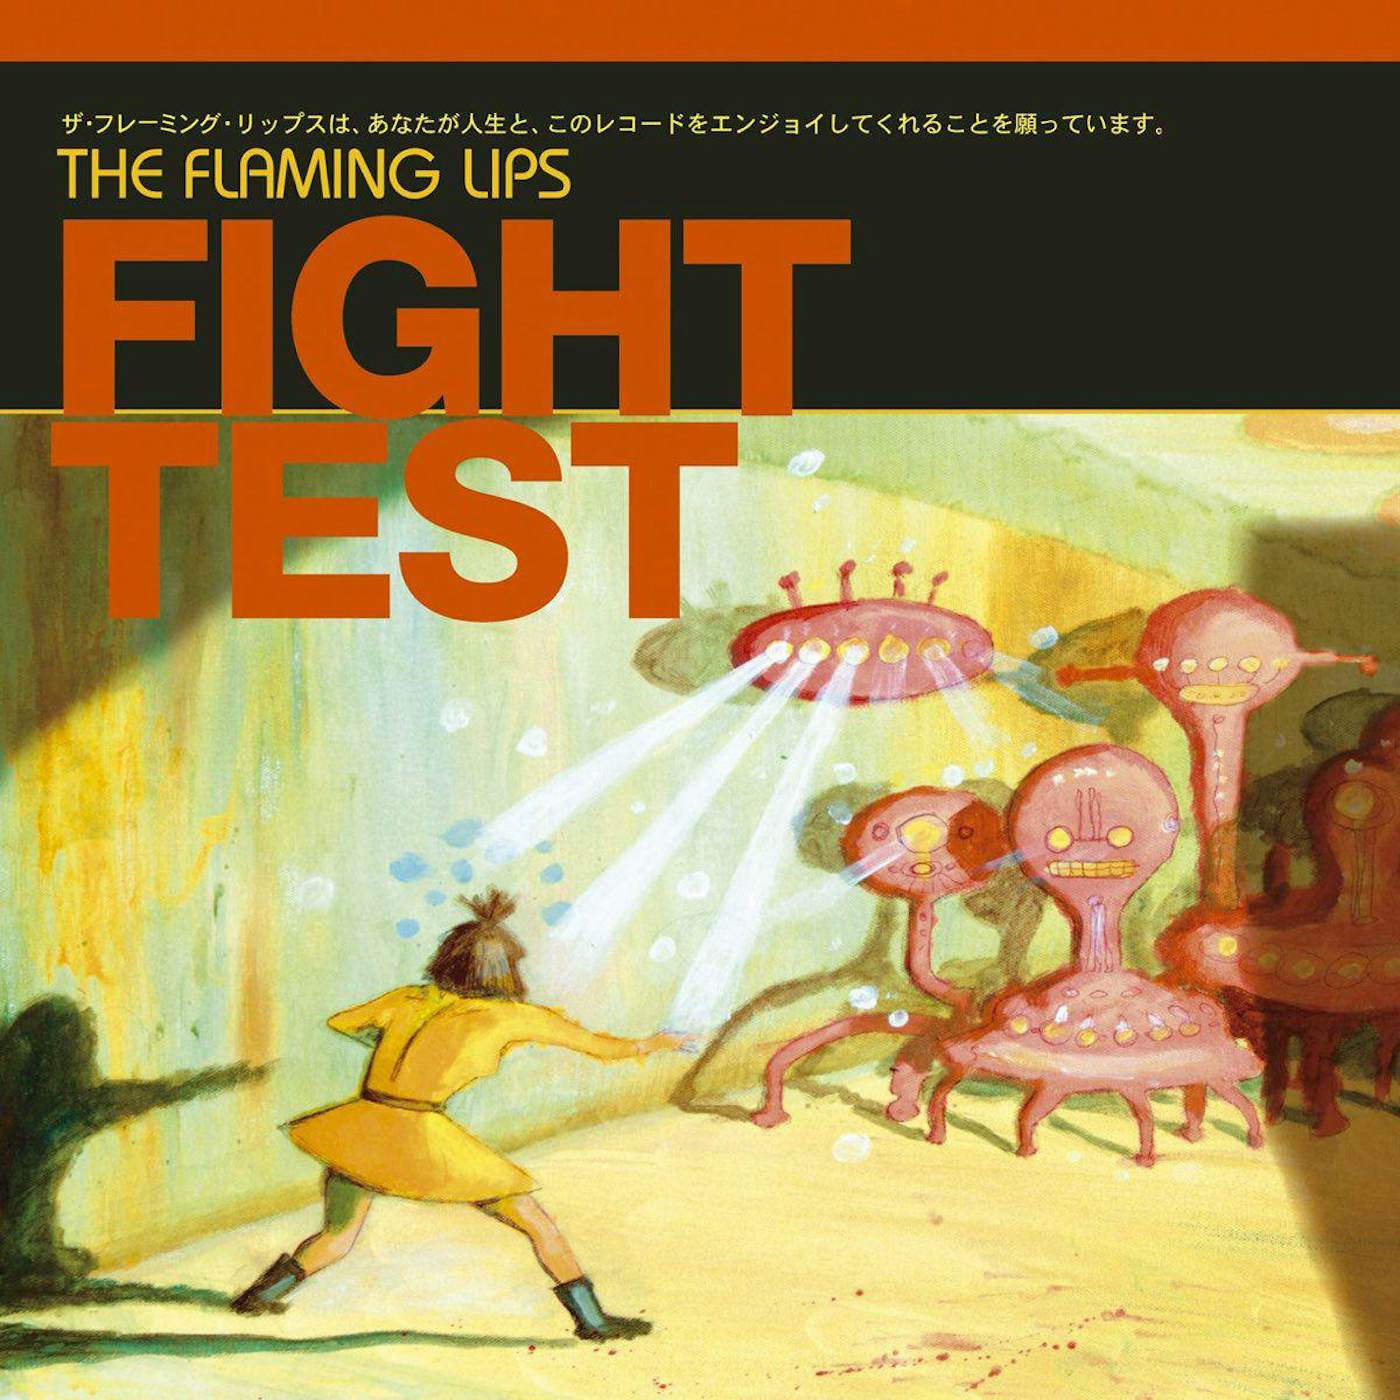 The Flaming Lips Fight Test Vinyl Record